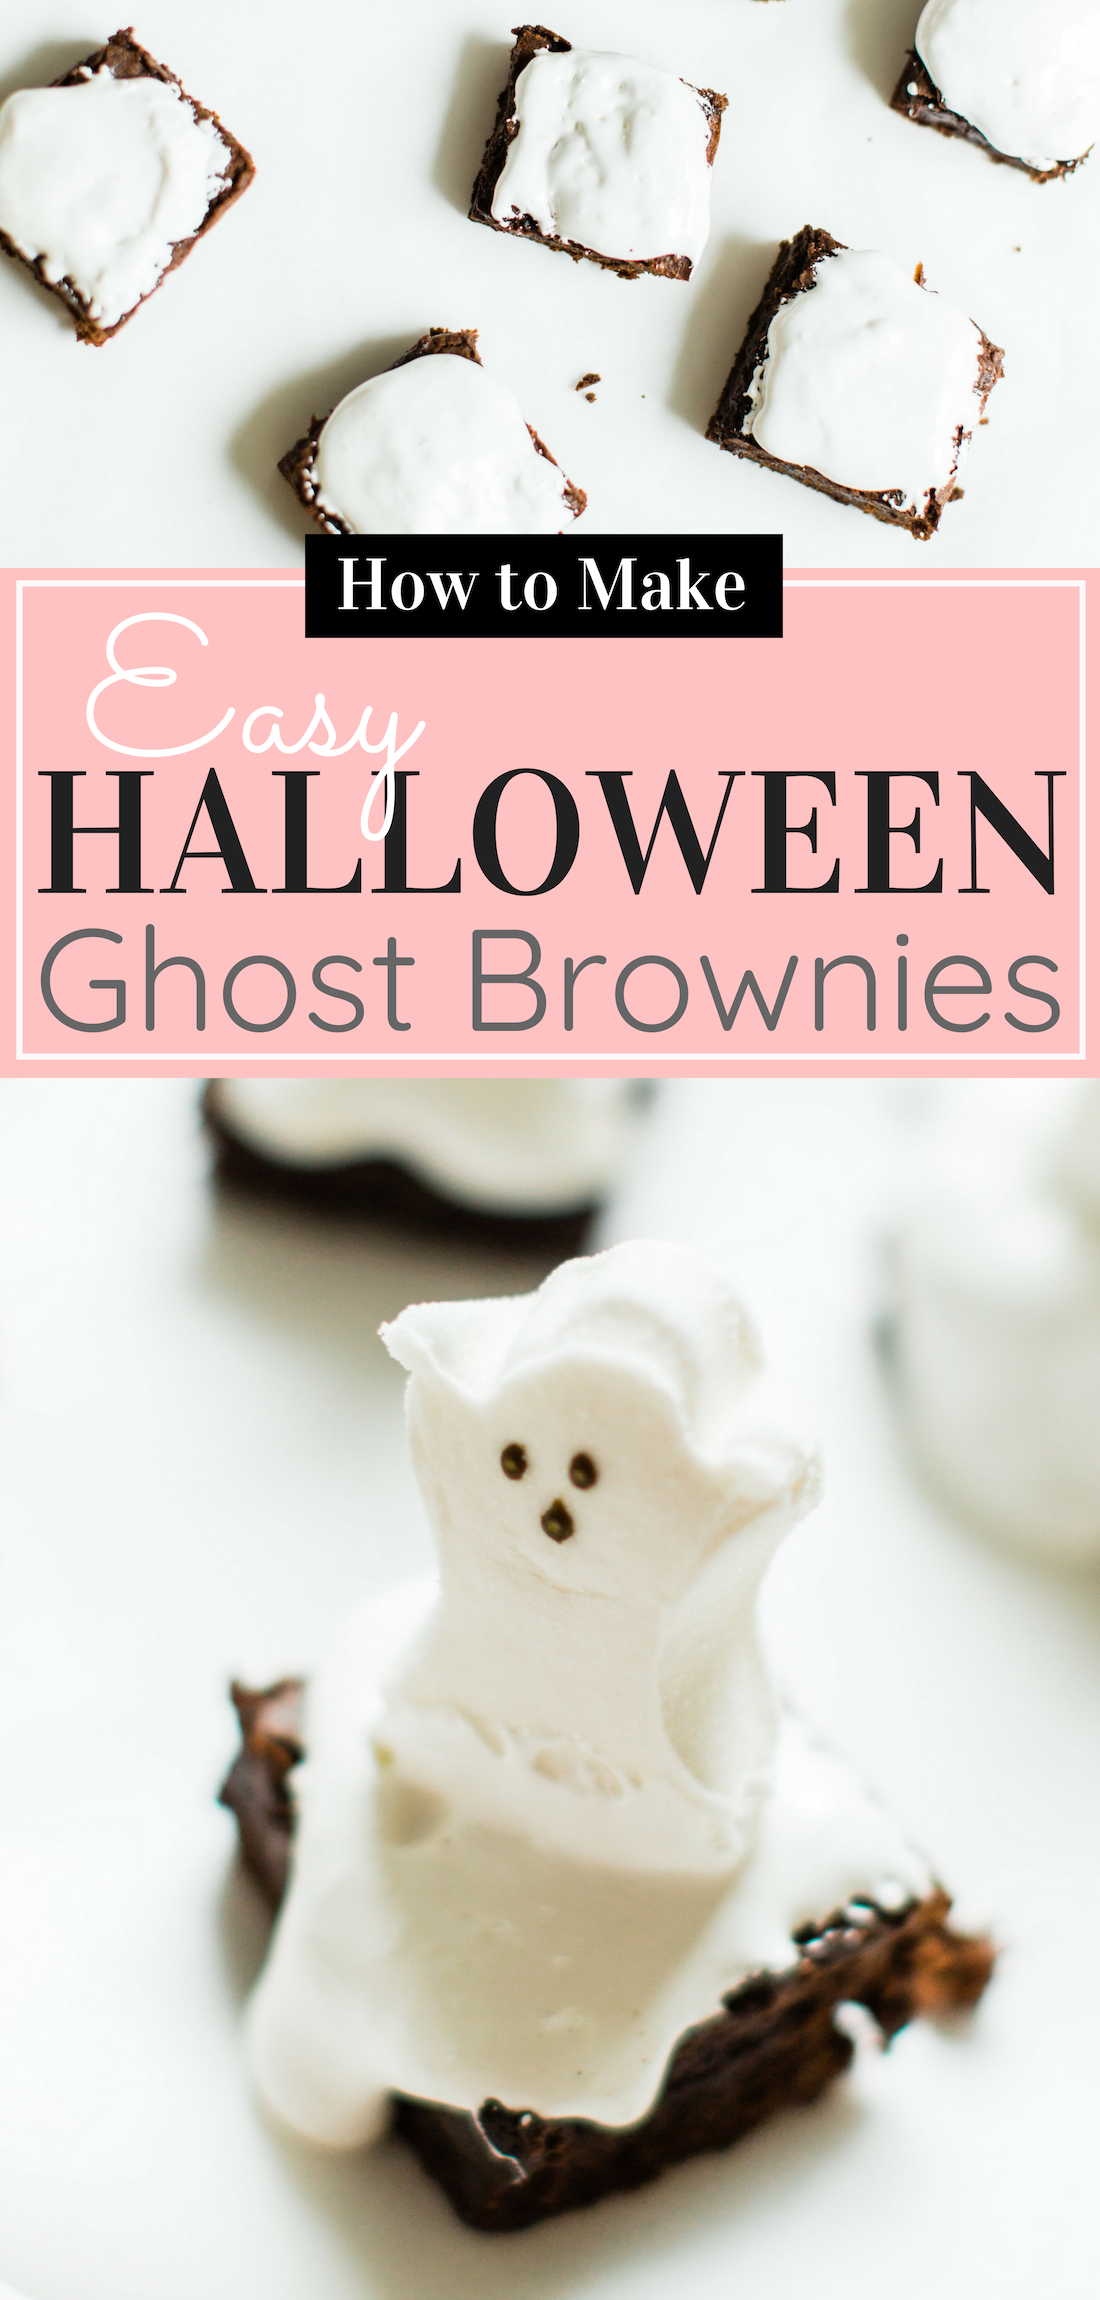 These spooky Halloween ghost brownies are delicious, adorable, and so easy to make. Kids and grownups alike will clamor for these haunted brownies! Click through for the details. #ghostbrownies #halloween #halloweendessert #halloweenbrownies #recipe #halloweenrecipe #diy #diyghostbrownies #halloweendesserts | glitterinc.com | @glitterinc